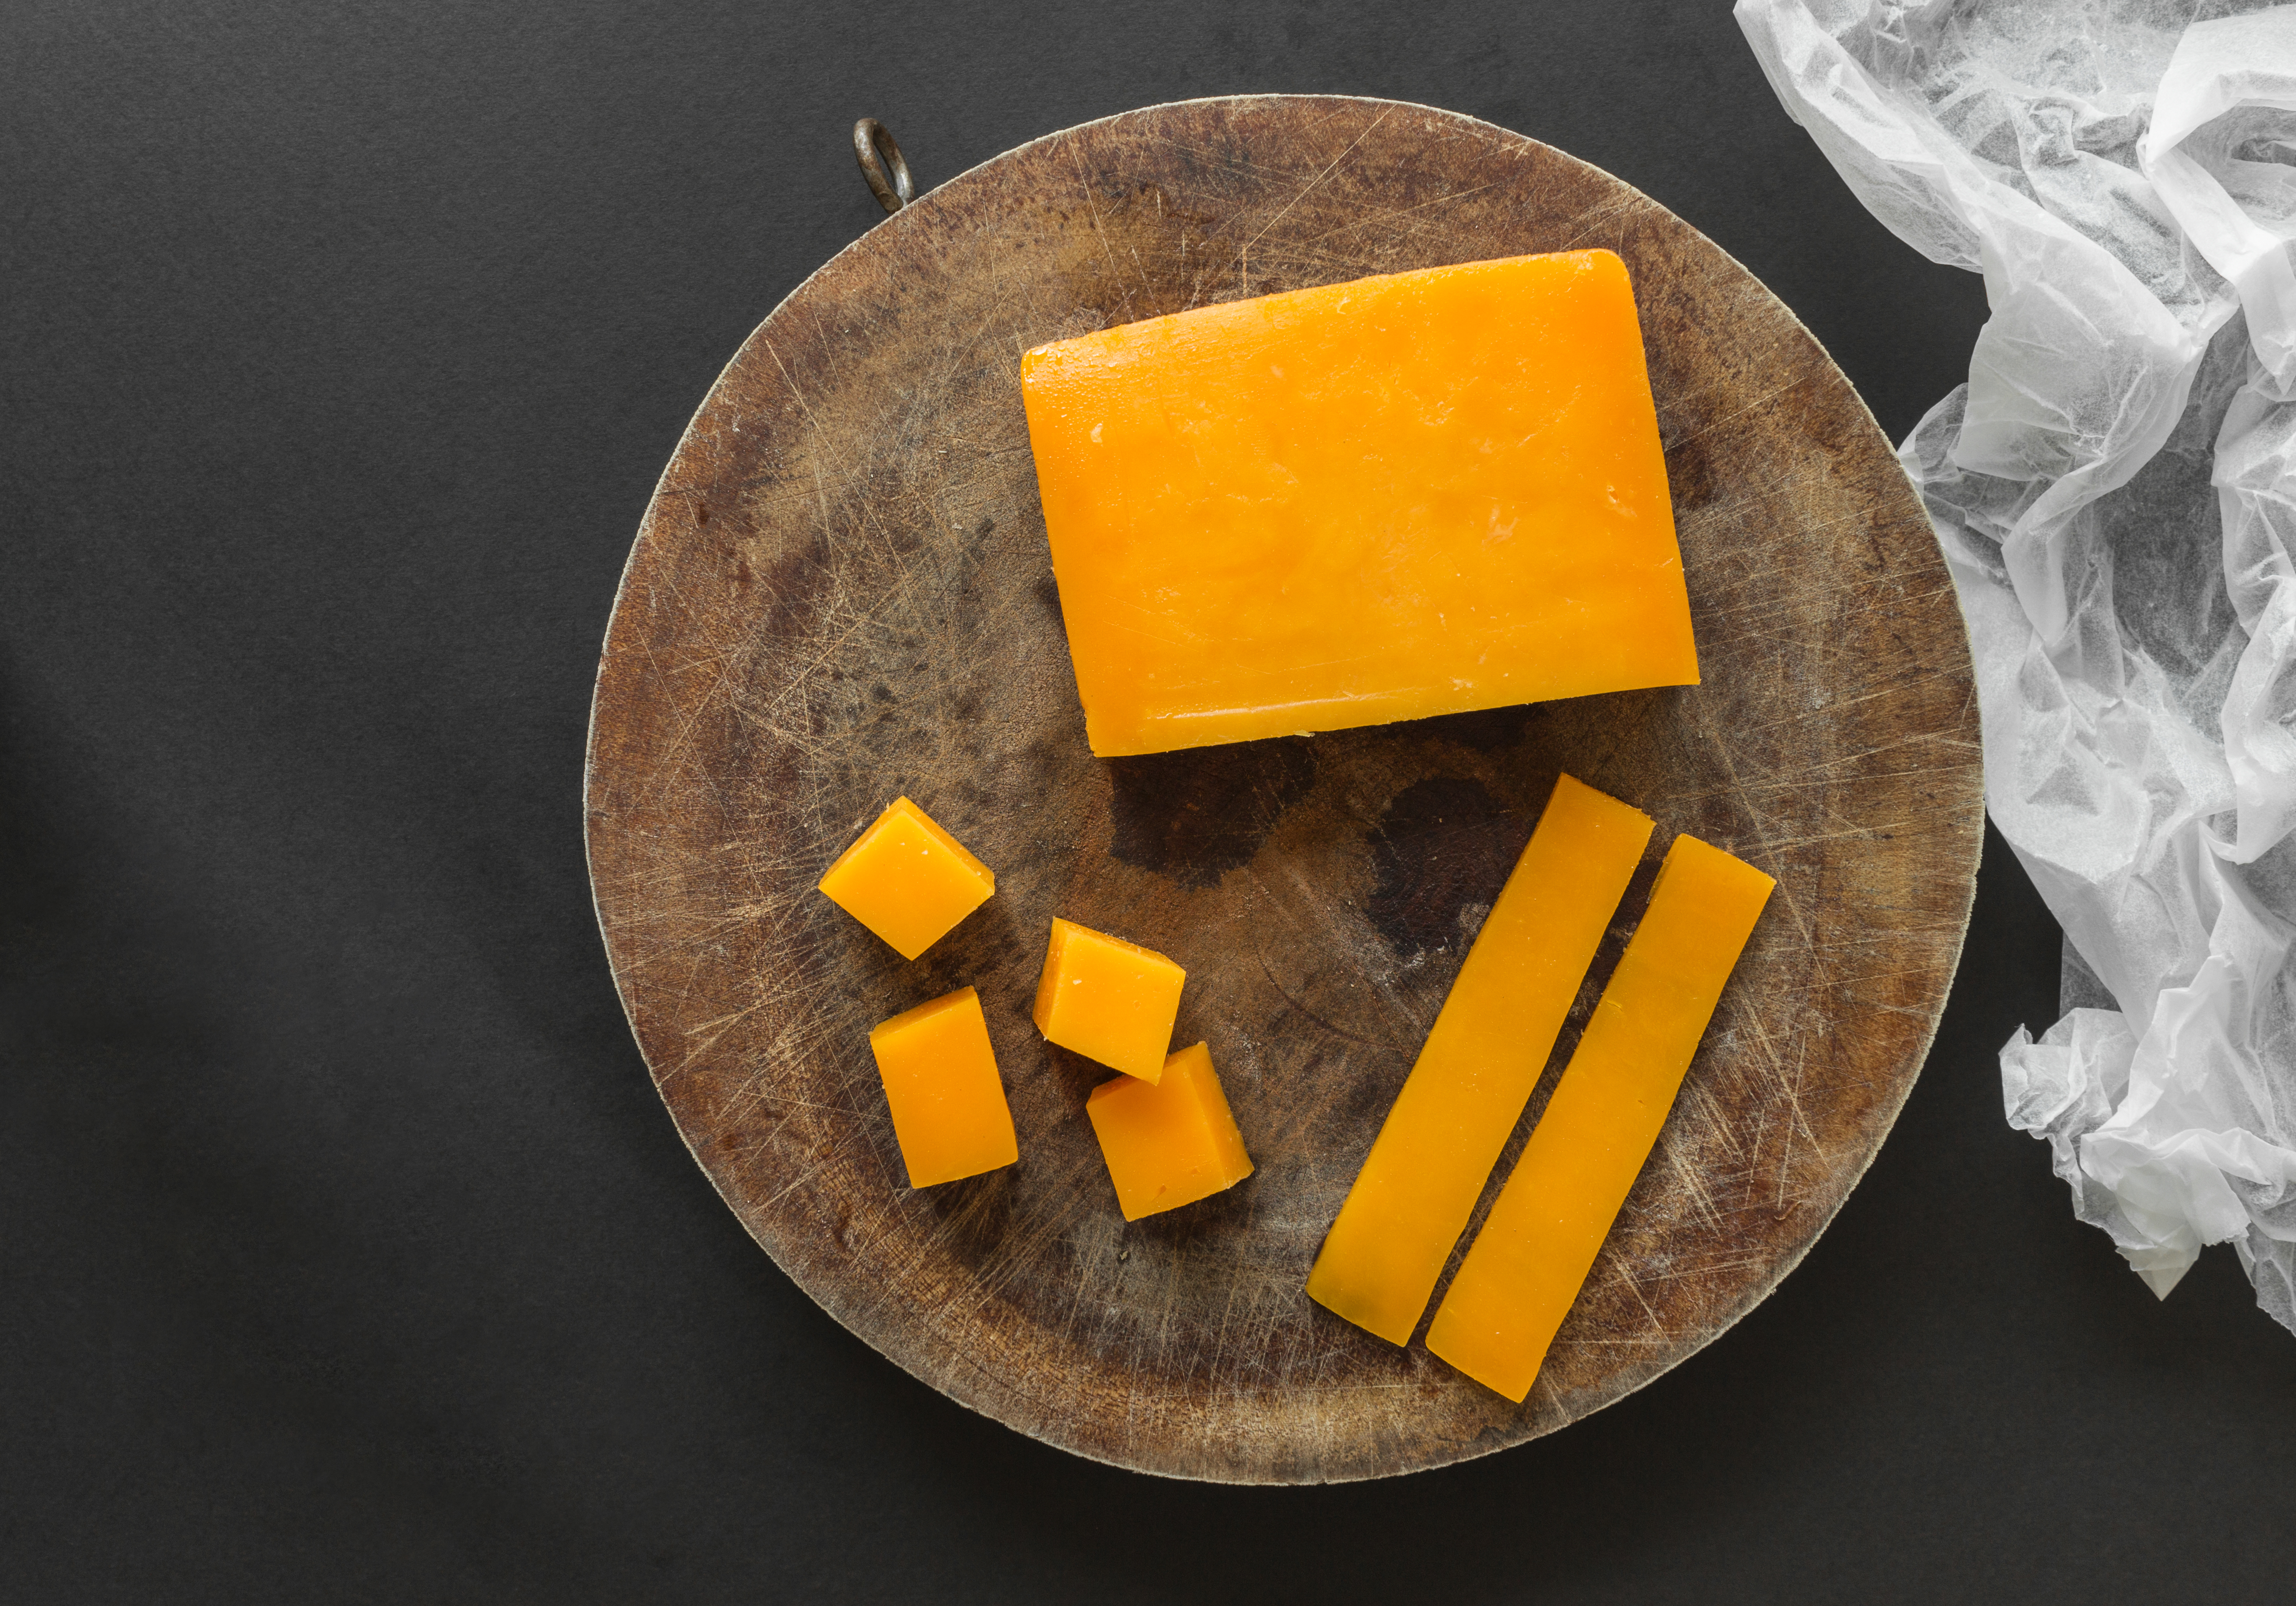 This Time-Saving Tool 'Goes Through a Block of Cheese in Seconds